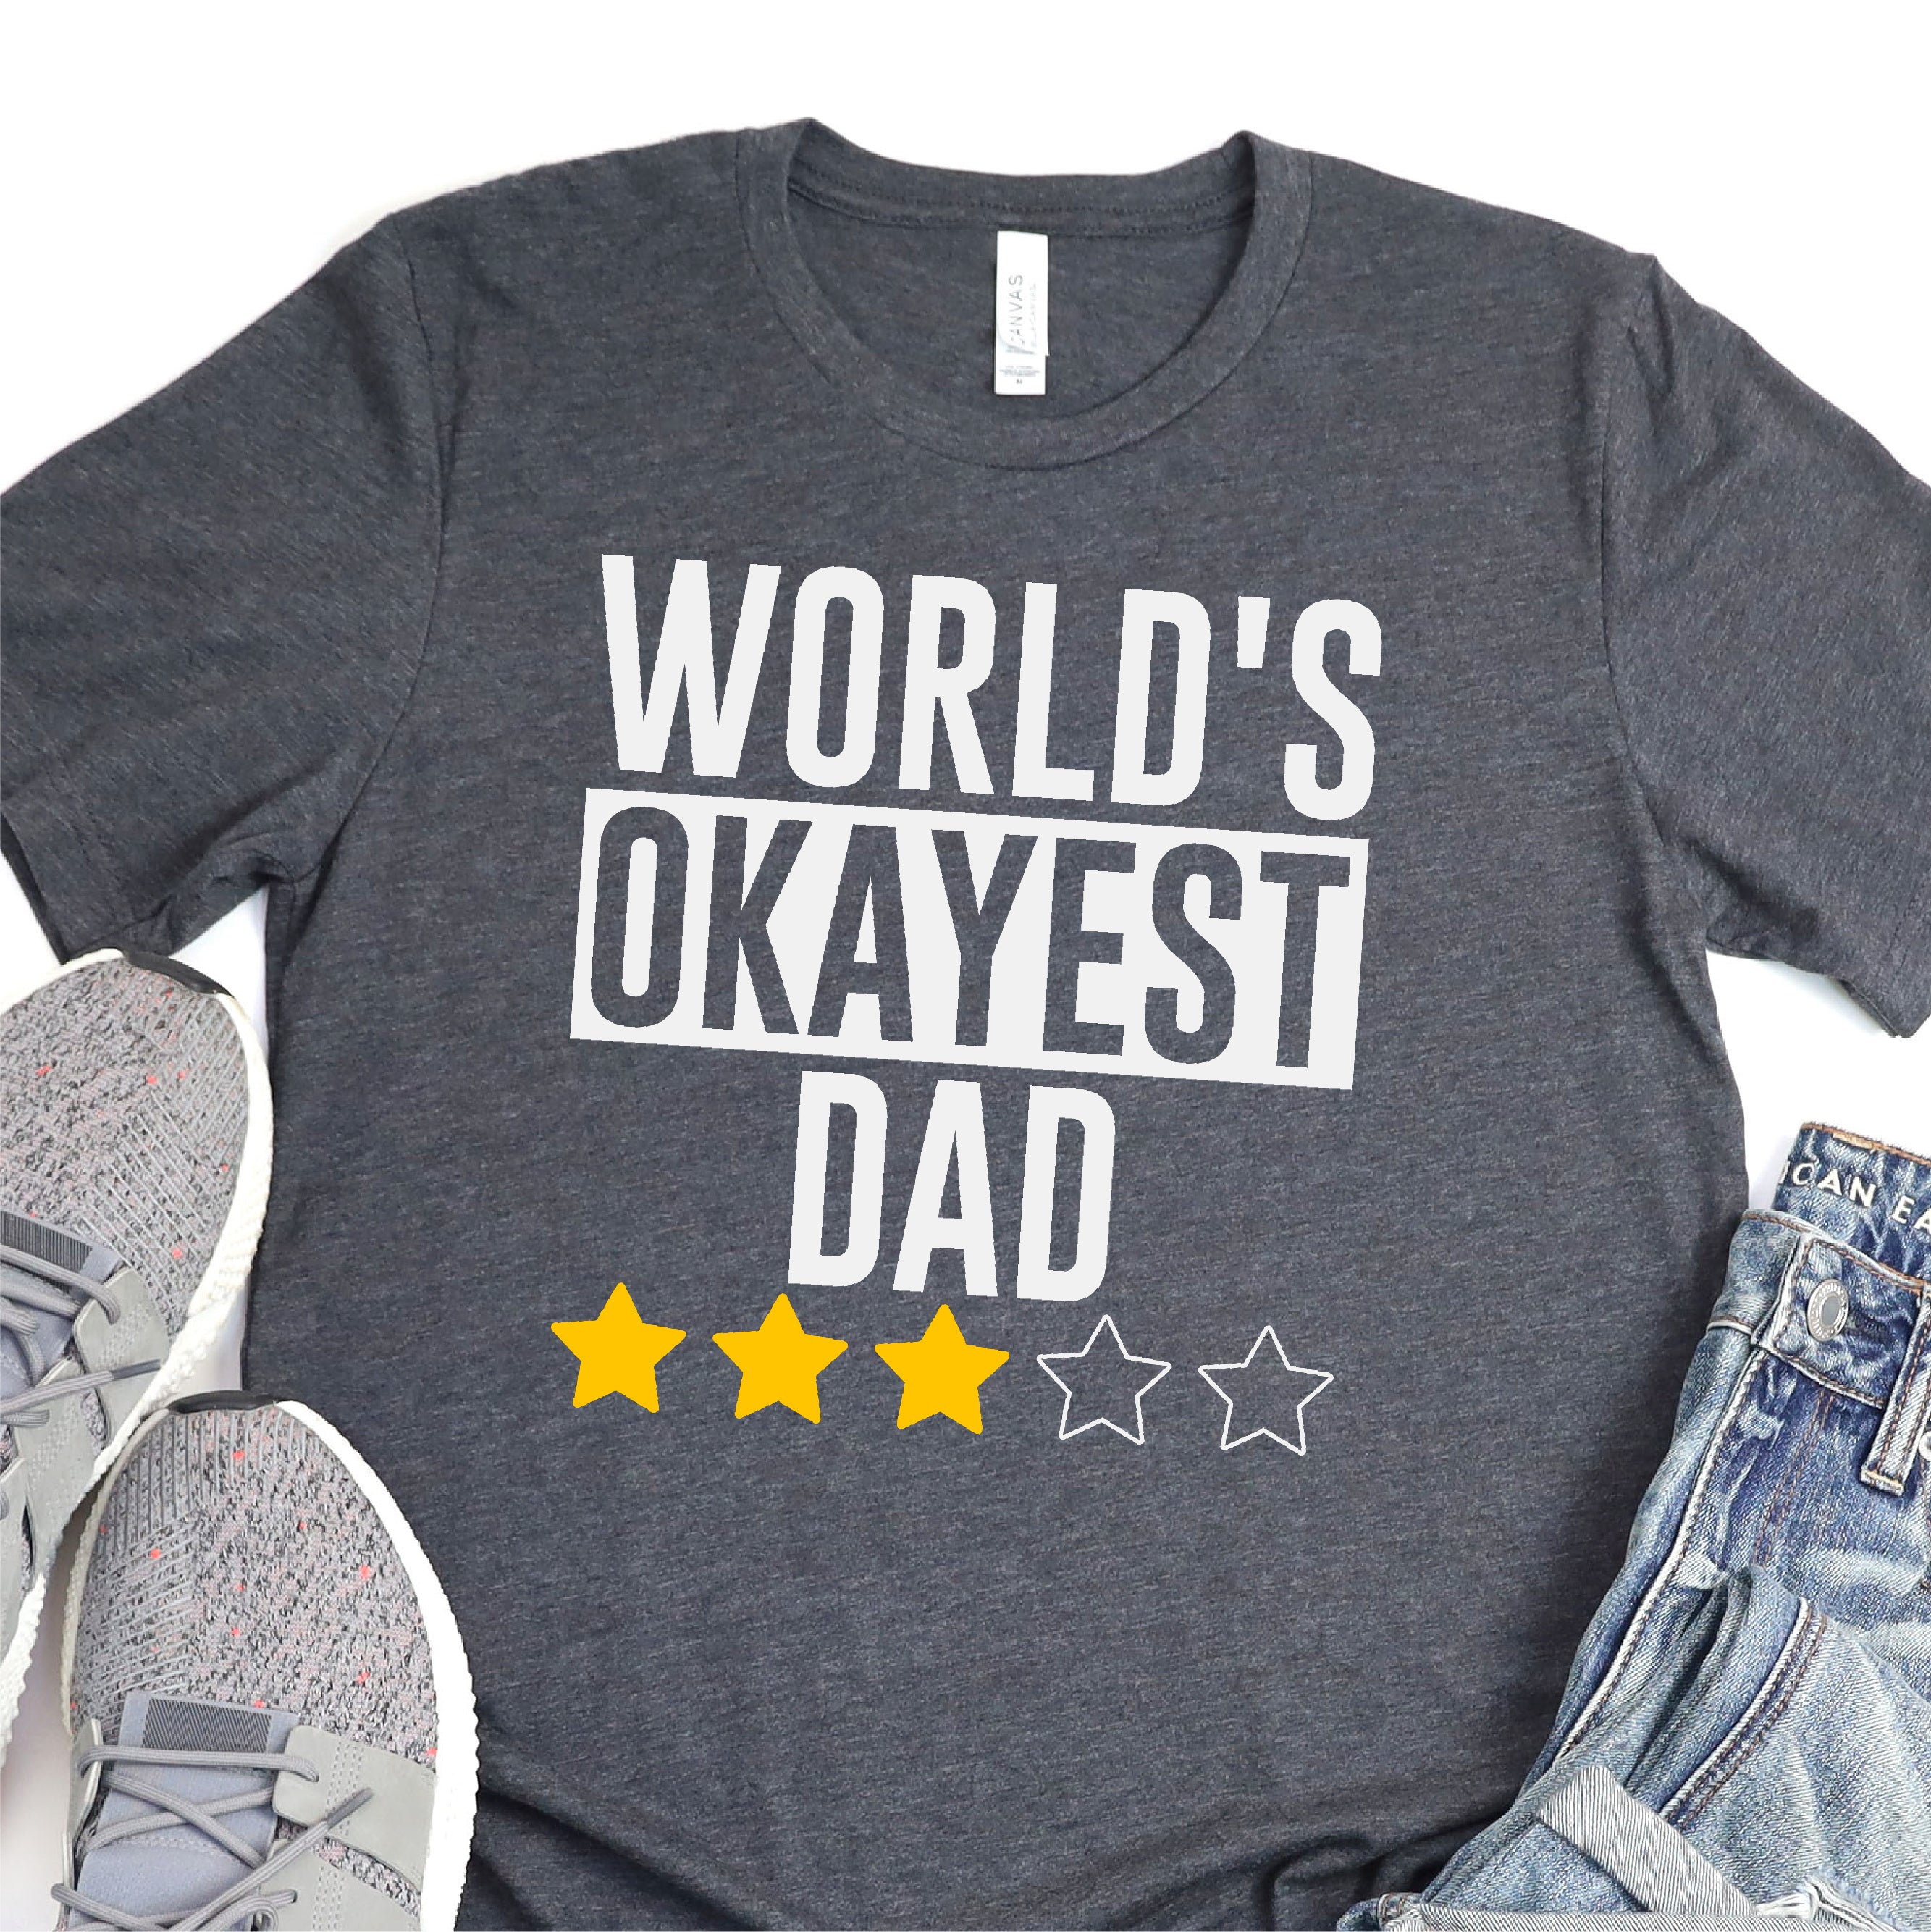 World's Okayest Dad - Funny Shirts - Father's Day DTF Transfer - T-shirt Transfer For Dad Nashville Design House